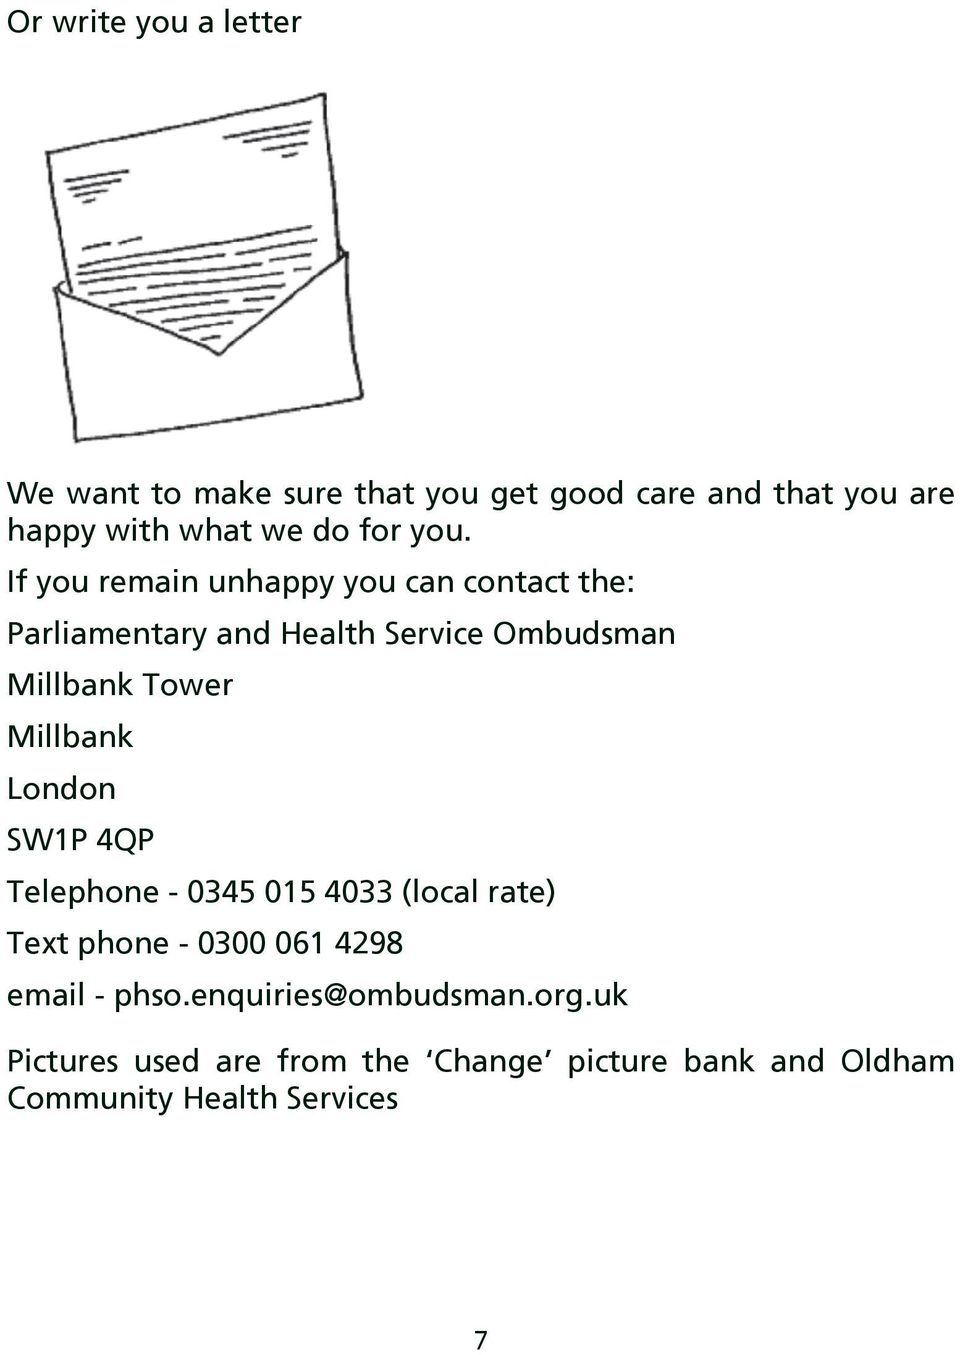 can contact the: n unhappy Parliamentary you can and contact Health Service the: Ombudsman Millbank Tower ry and Health Service Ombudsman er Millbank London SW1P 4QP Telephone